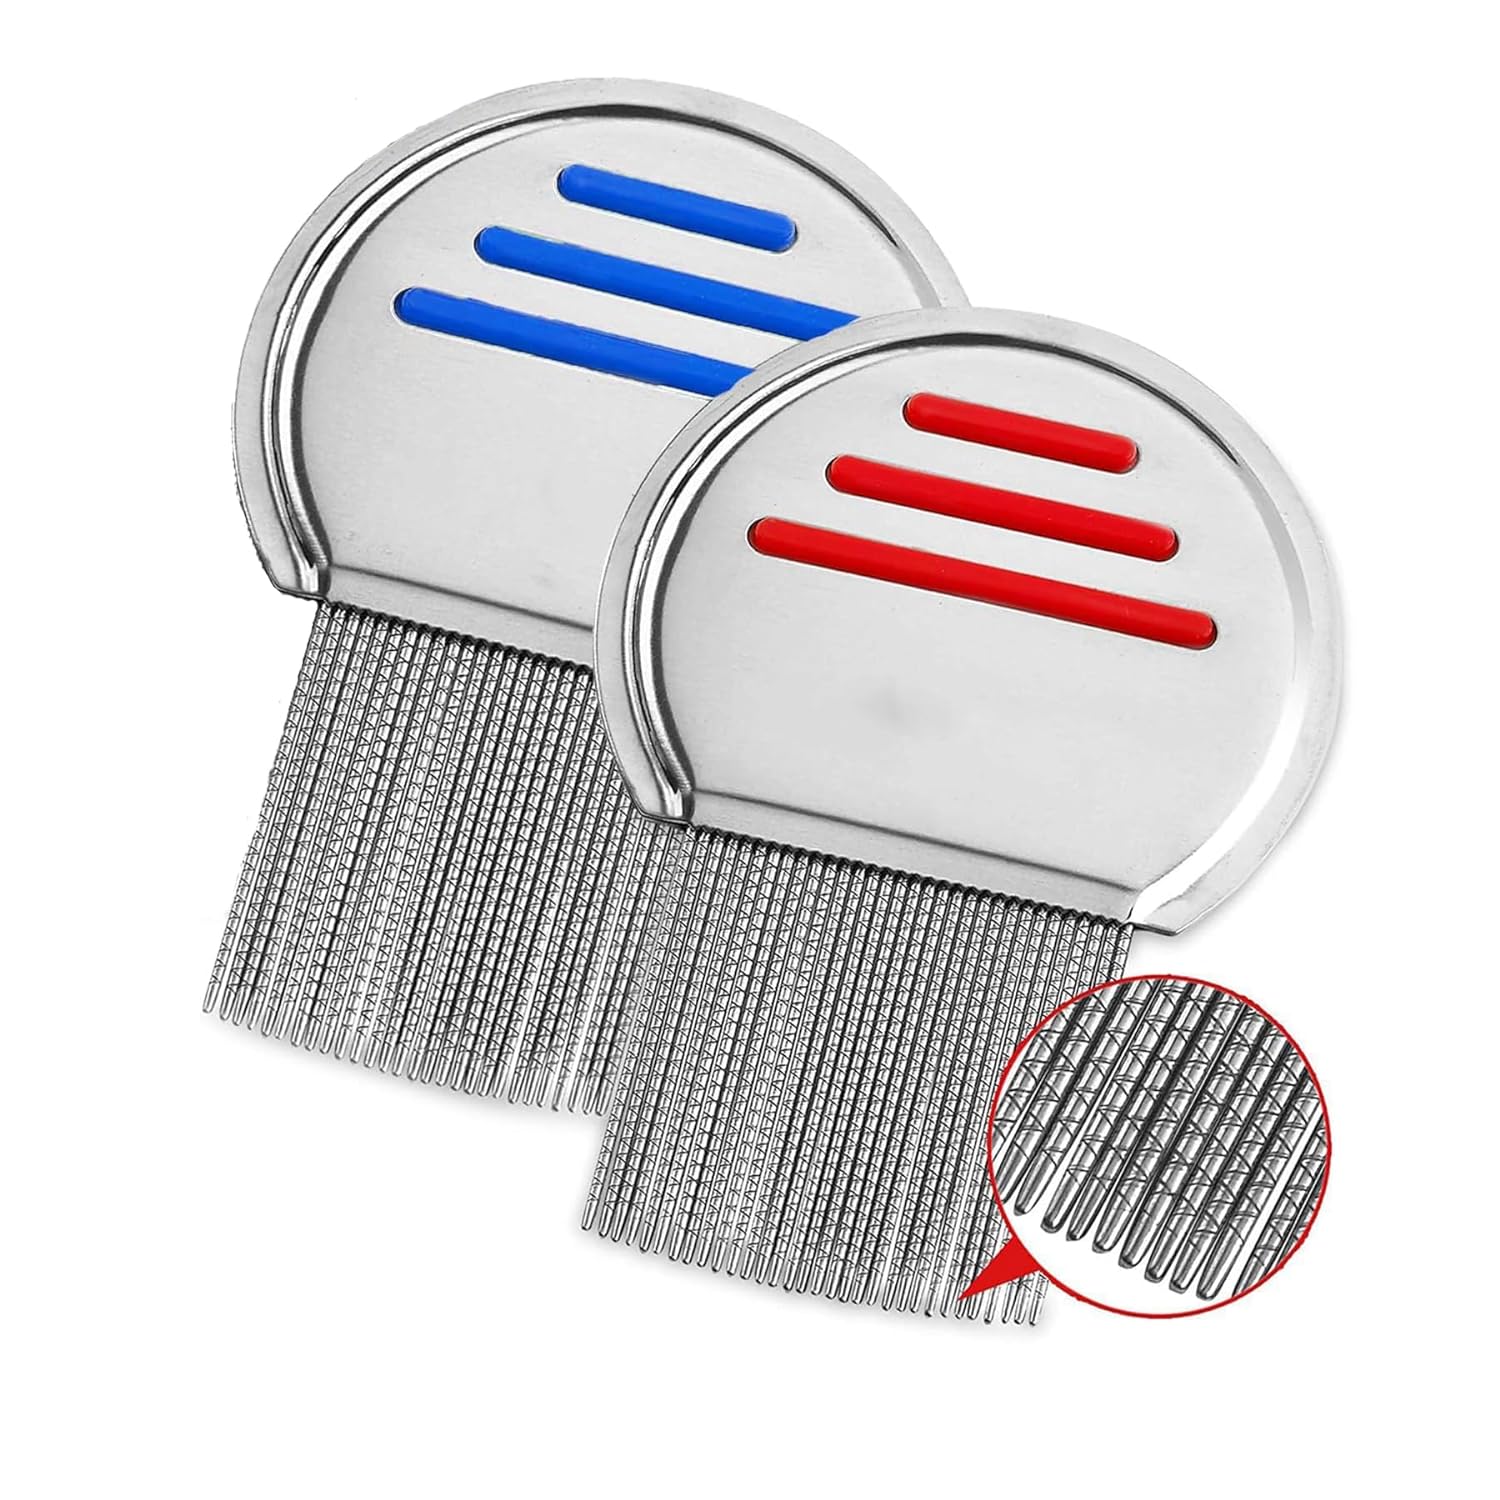 Pack of 2 Lice Comb, Nit Comb, Extra Fine Children\'s Reusable Lice Comb, Safely Removes Lice, for Children Pets, Head Lice Treatment (Red and Blue)